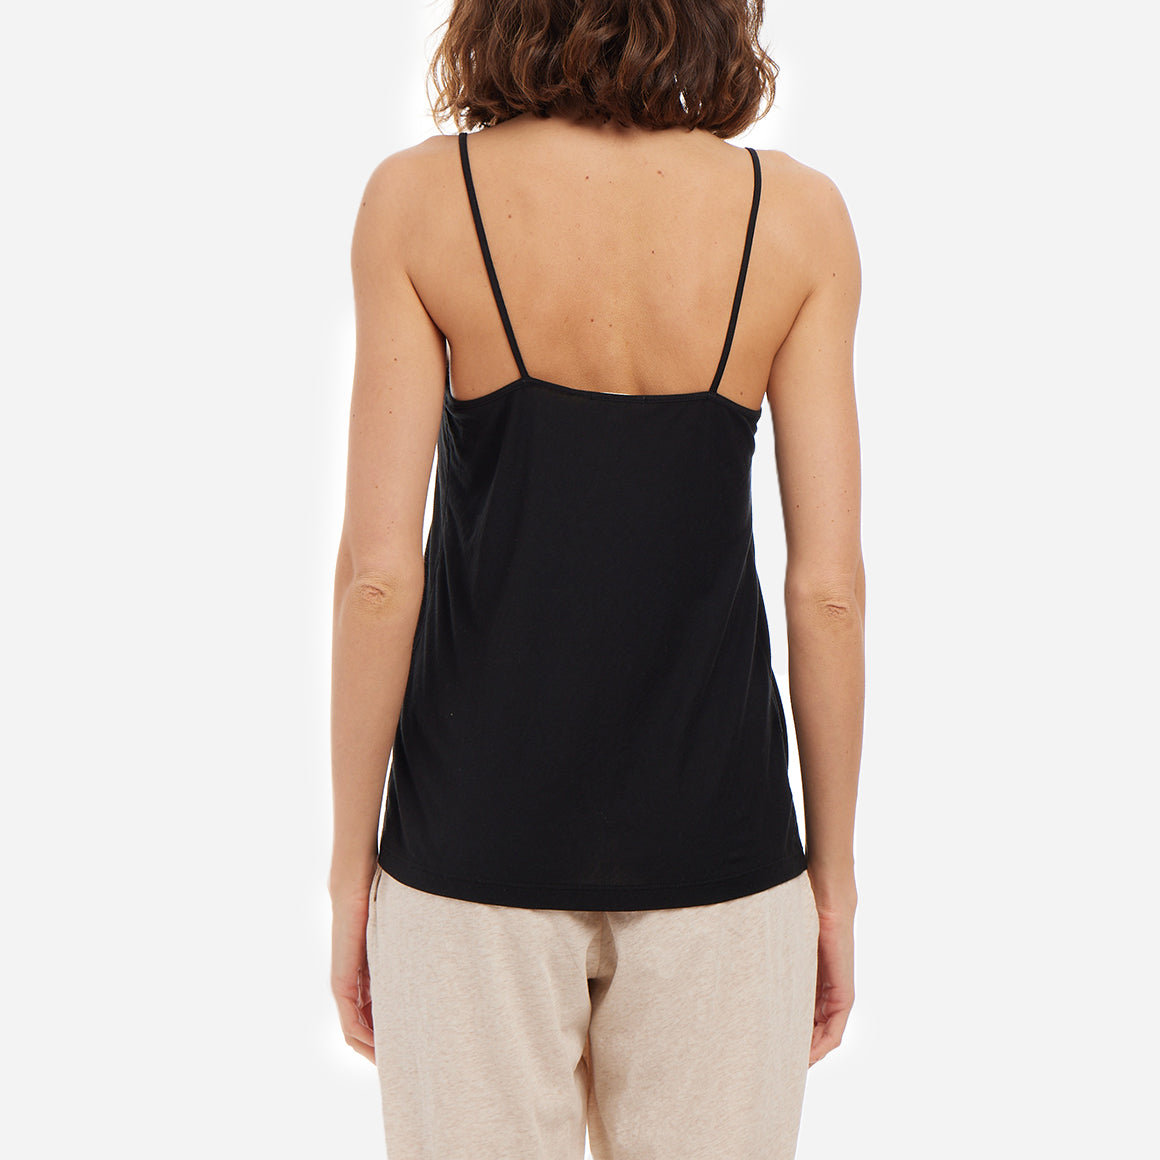 Skin’s Organic Cotton Sexy Cami provides the perfect blend of style and comfort. Made with luxuriously soft organic pima cotton, this camisole top has a blissful touch on your skin. The breathable and lightweight material ensures optimal comfort, making it perfect for bed or lounging at home. This relaxed fit cami top features delicate straps and a flattering neckline and exposed shoulder back that accentuates your natural beauty.